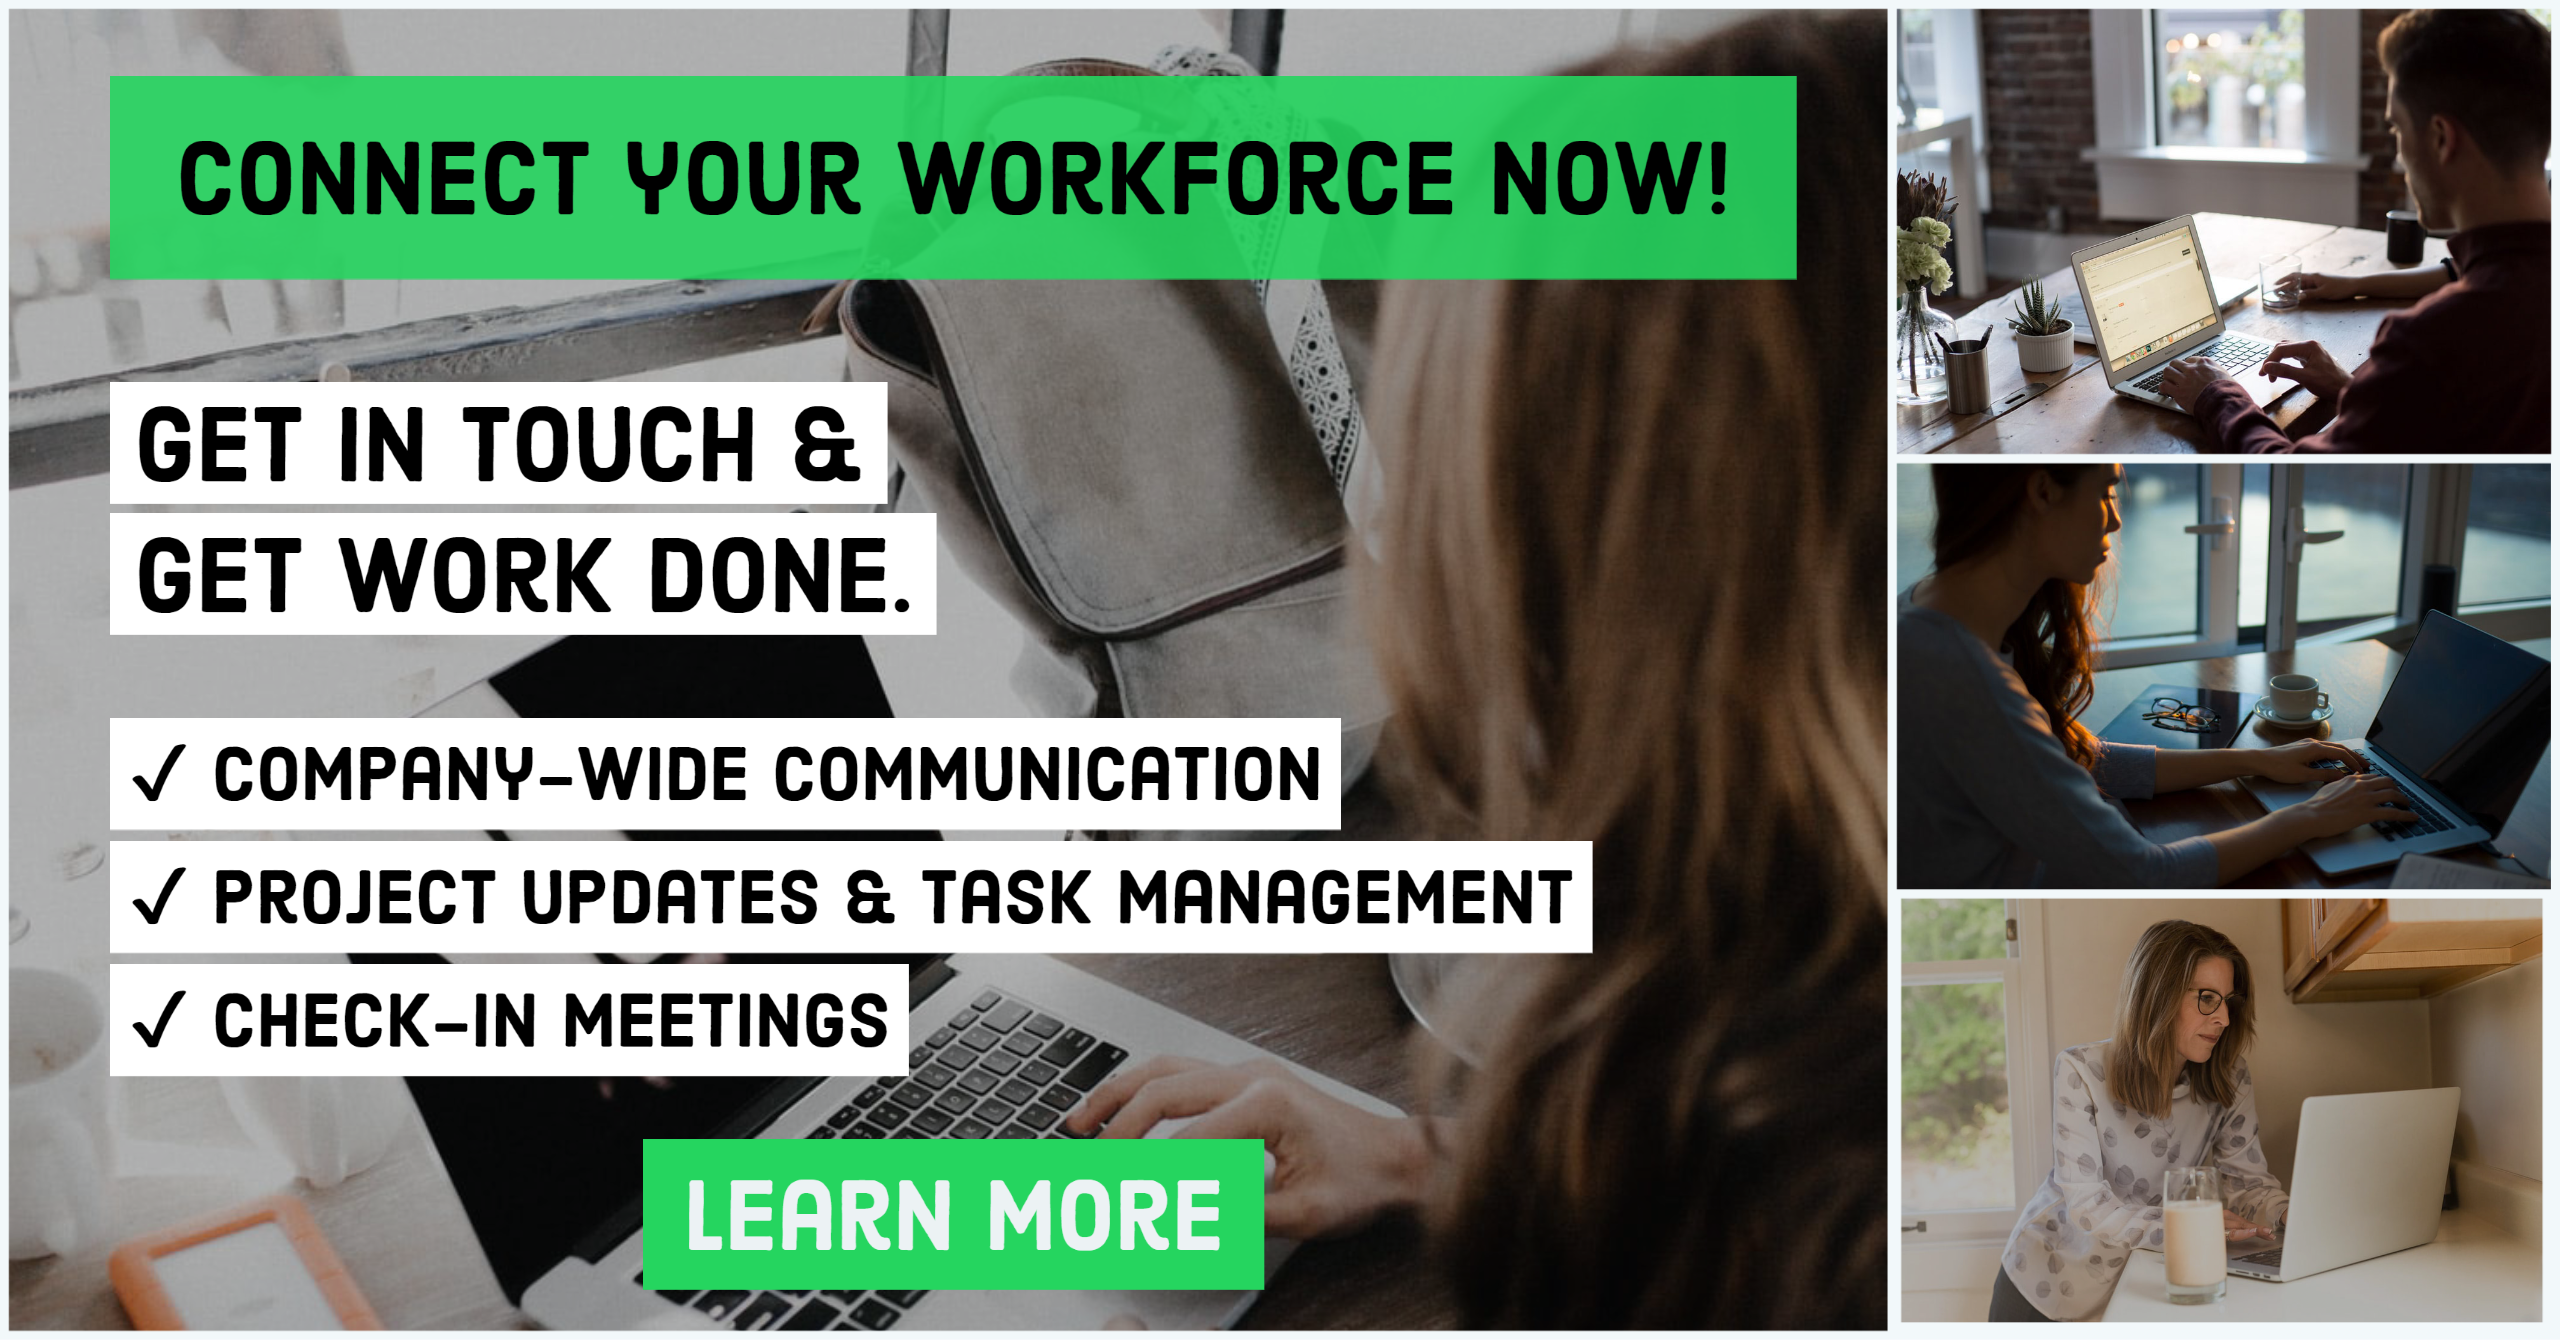 Twigg - Connect Your Workforce Now